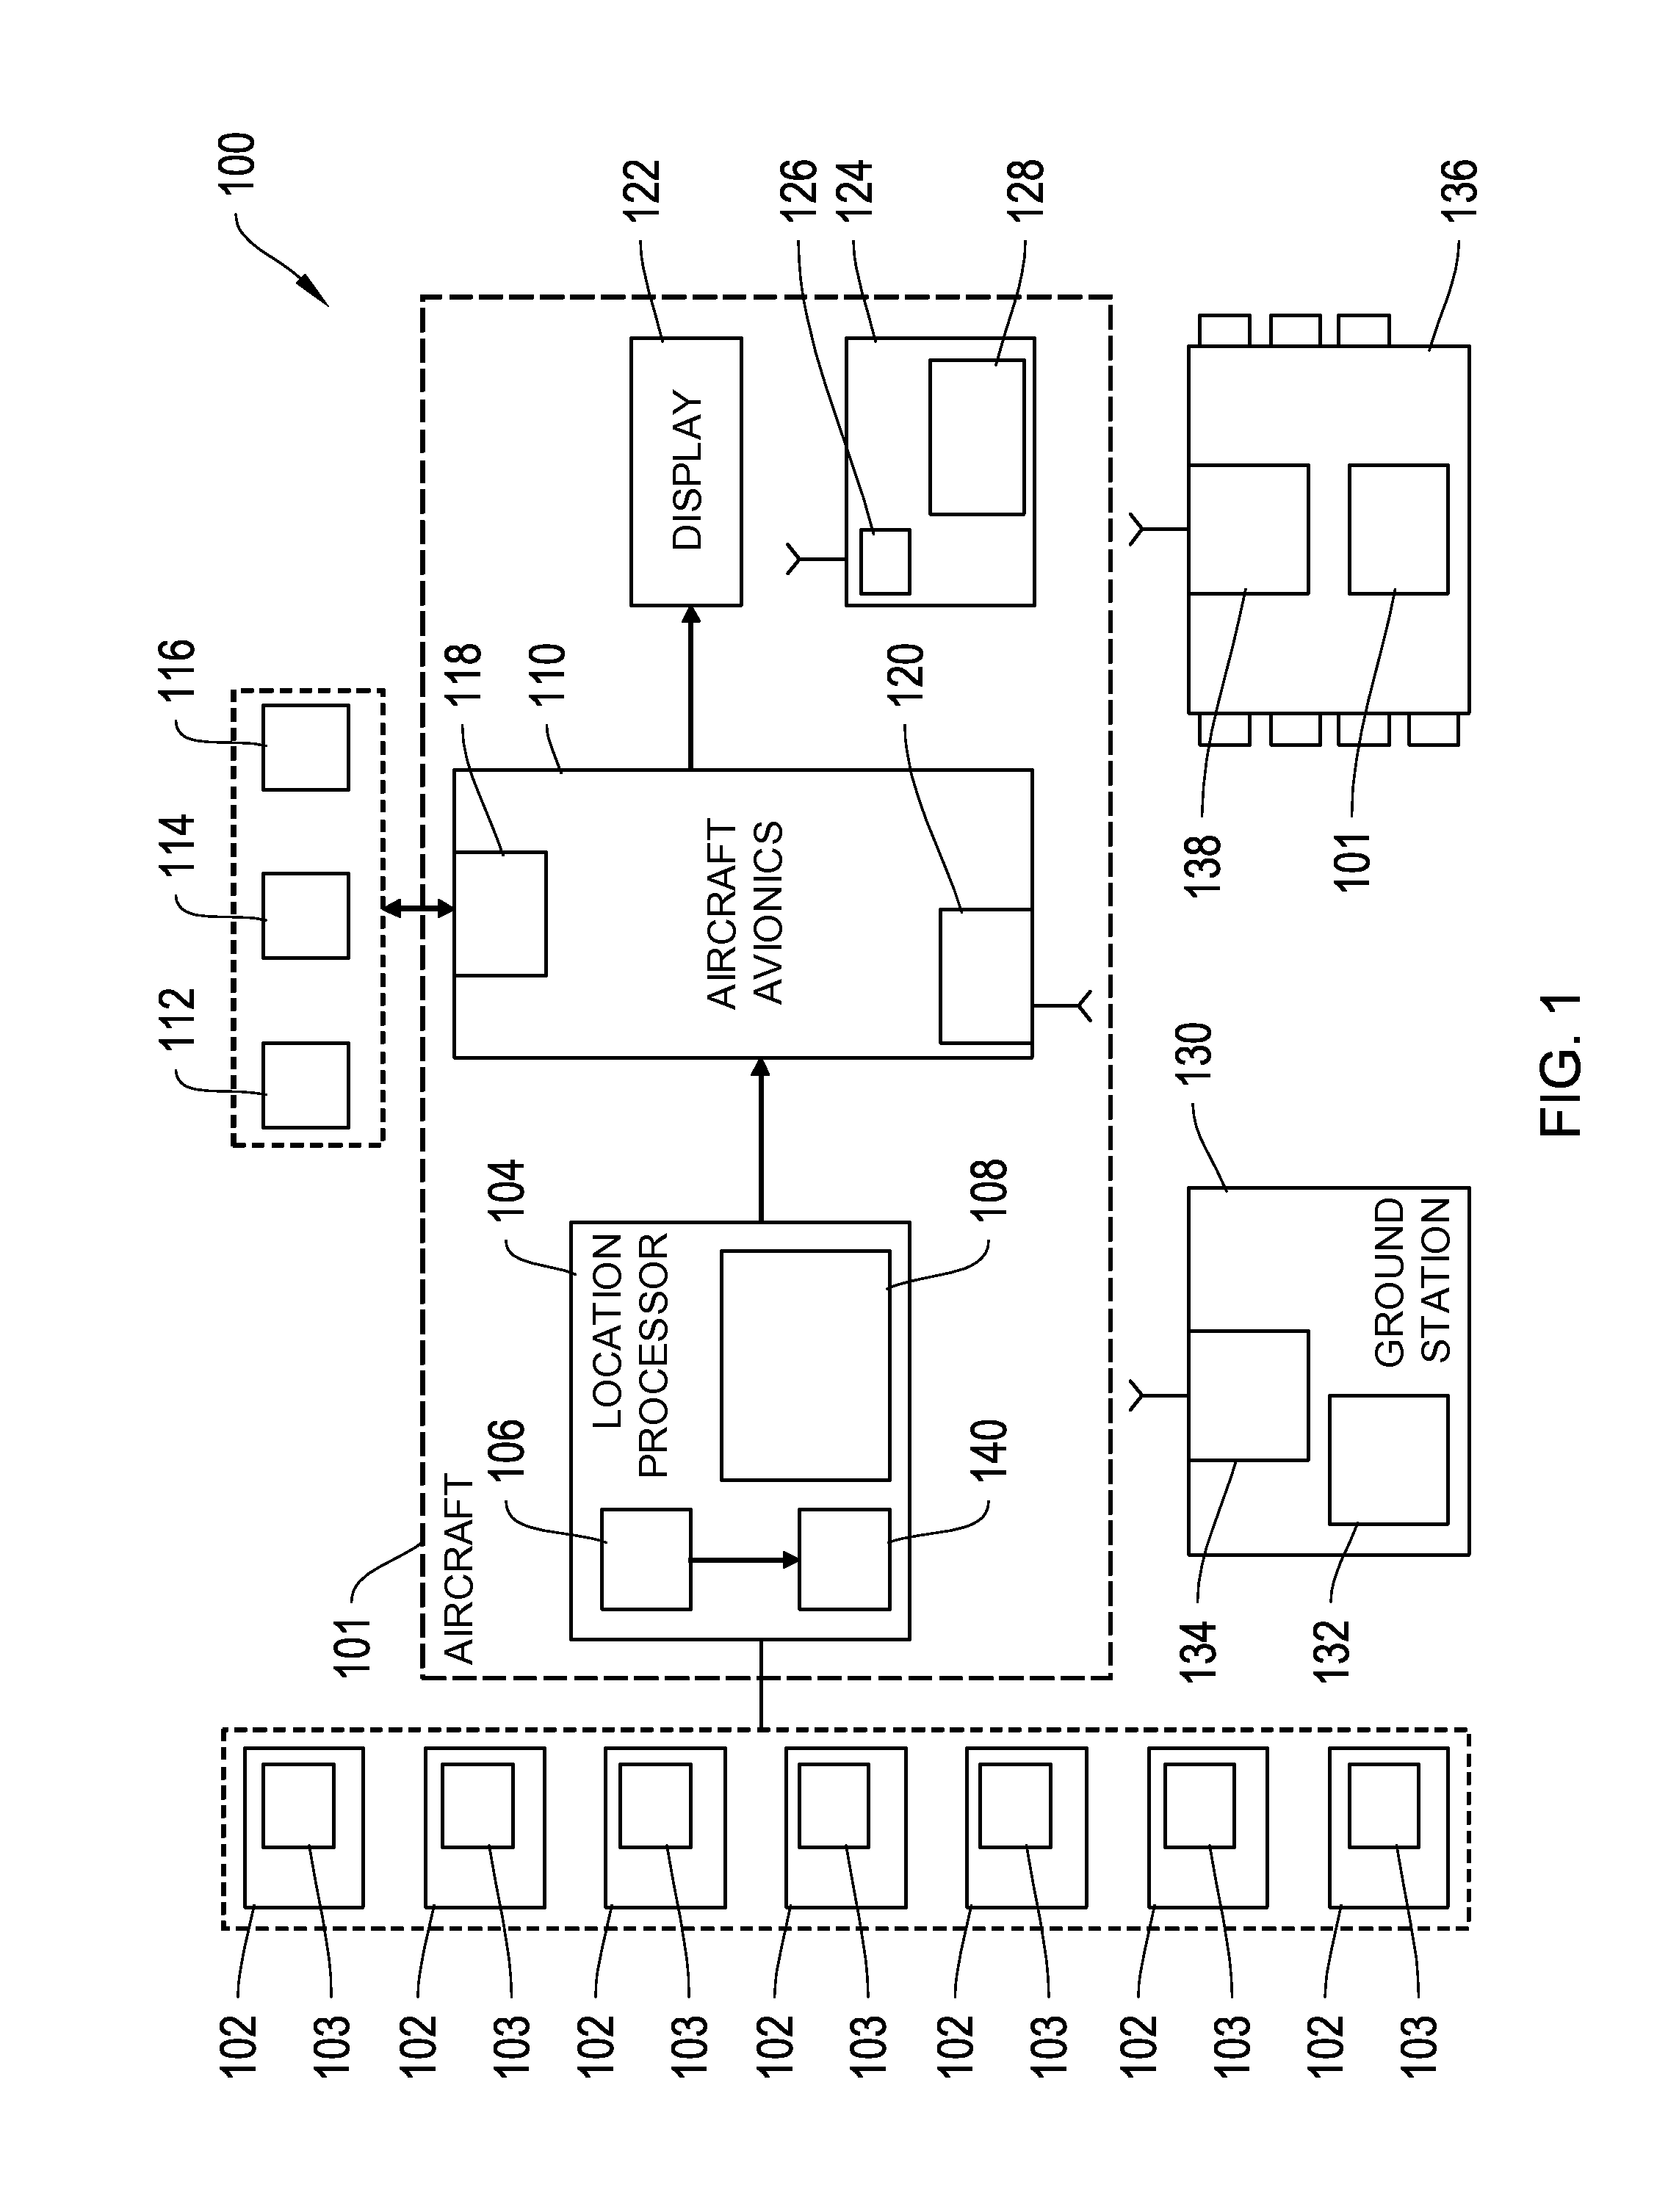 Systems and methods for distributed sensor clusters